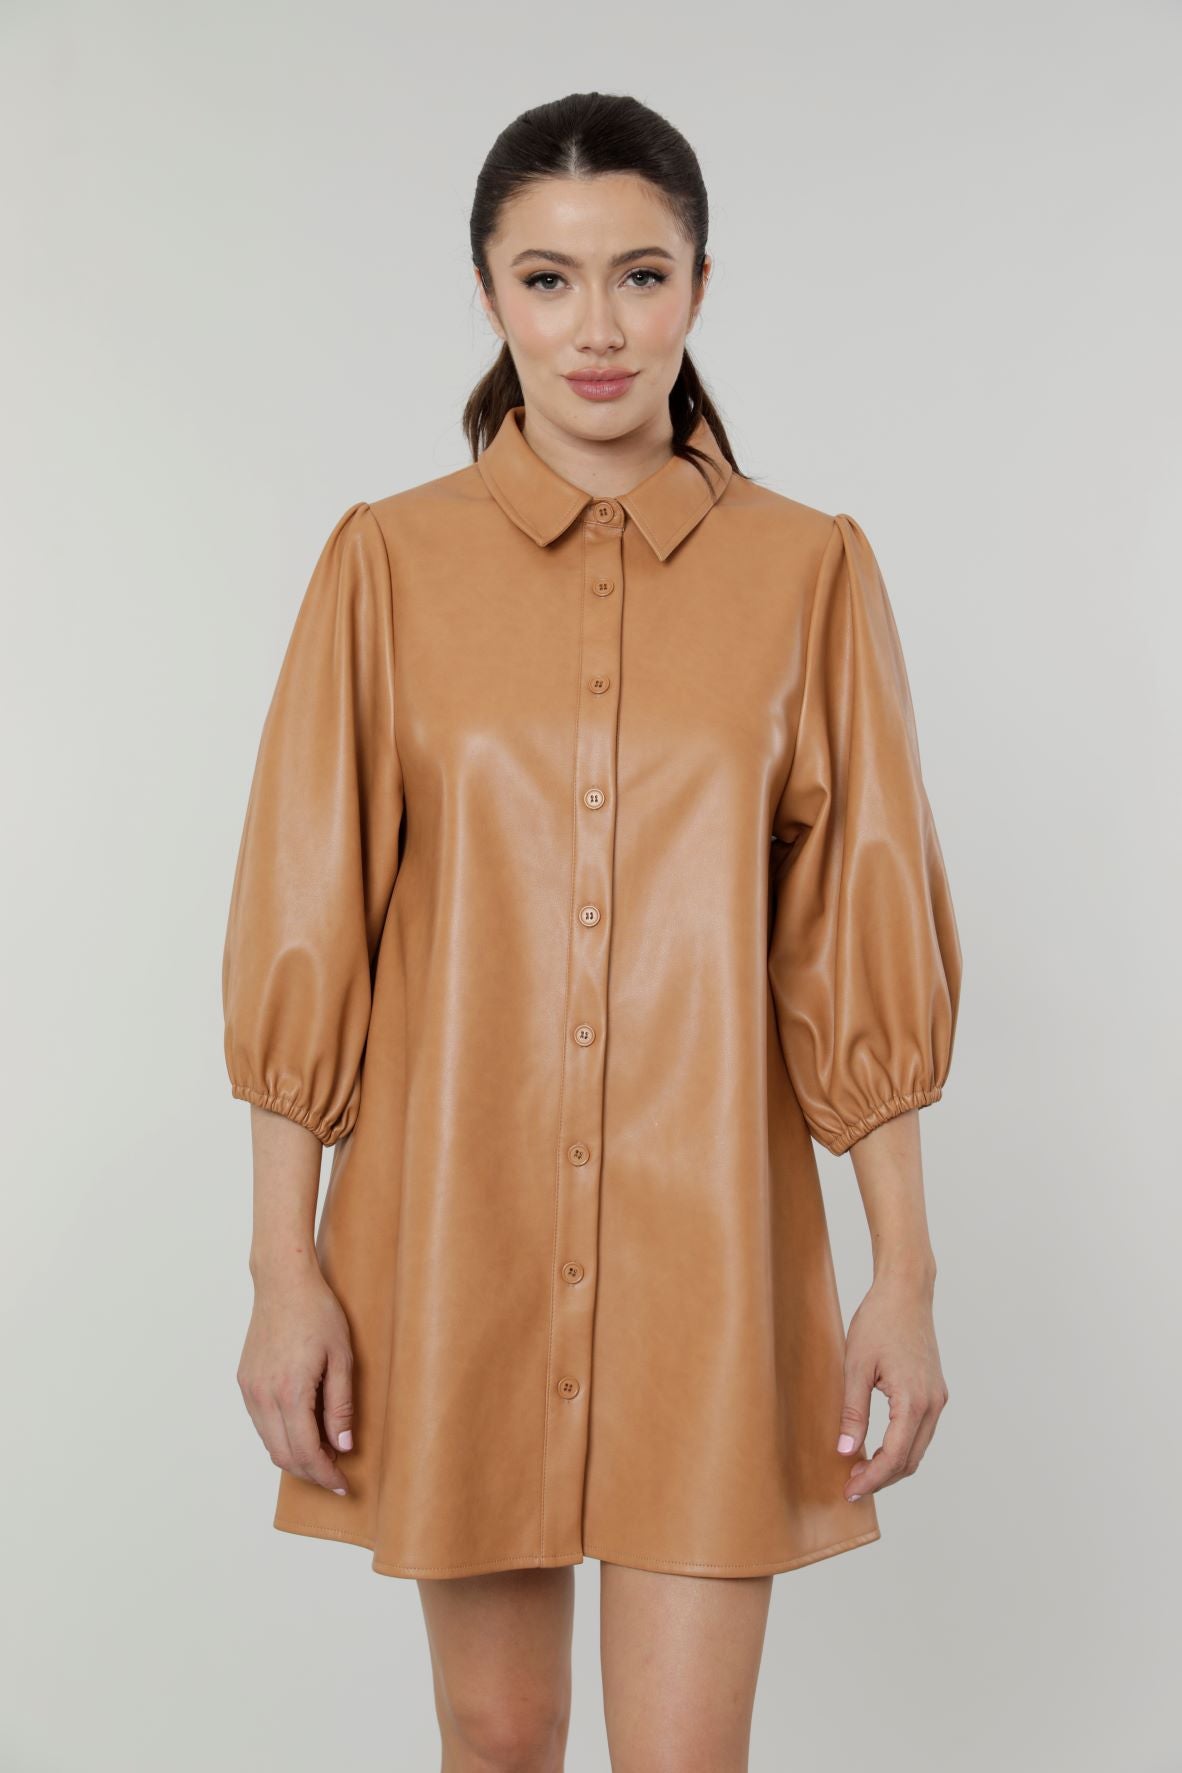 Dolce Cabo: Puff Sleeve Vegan Camel Leather Tunic